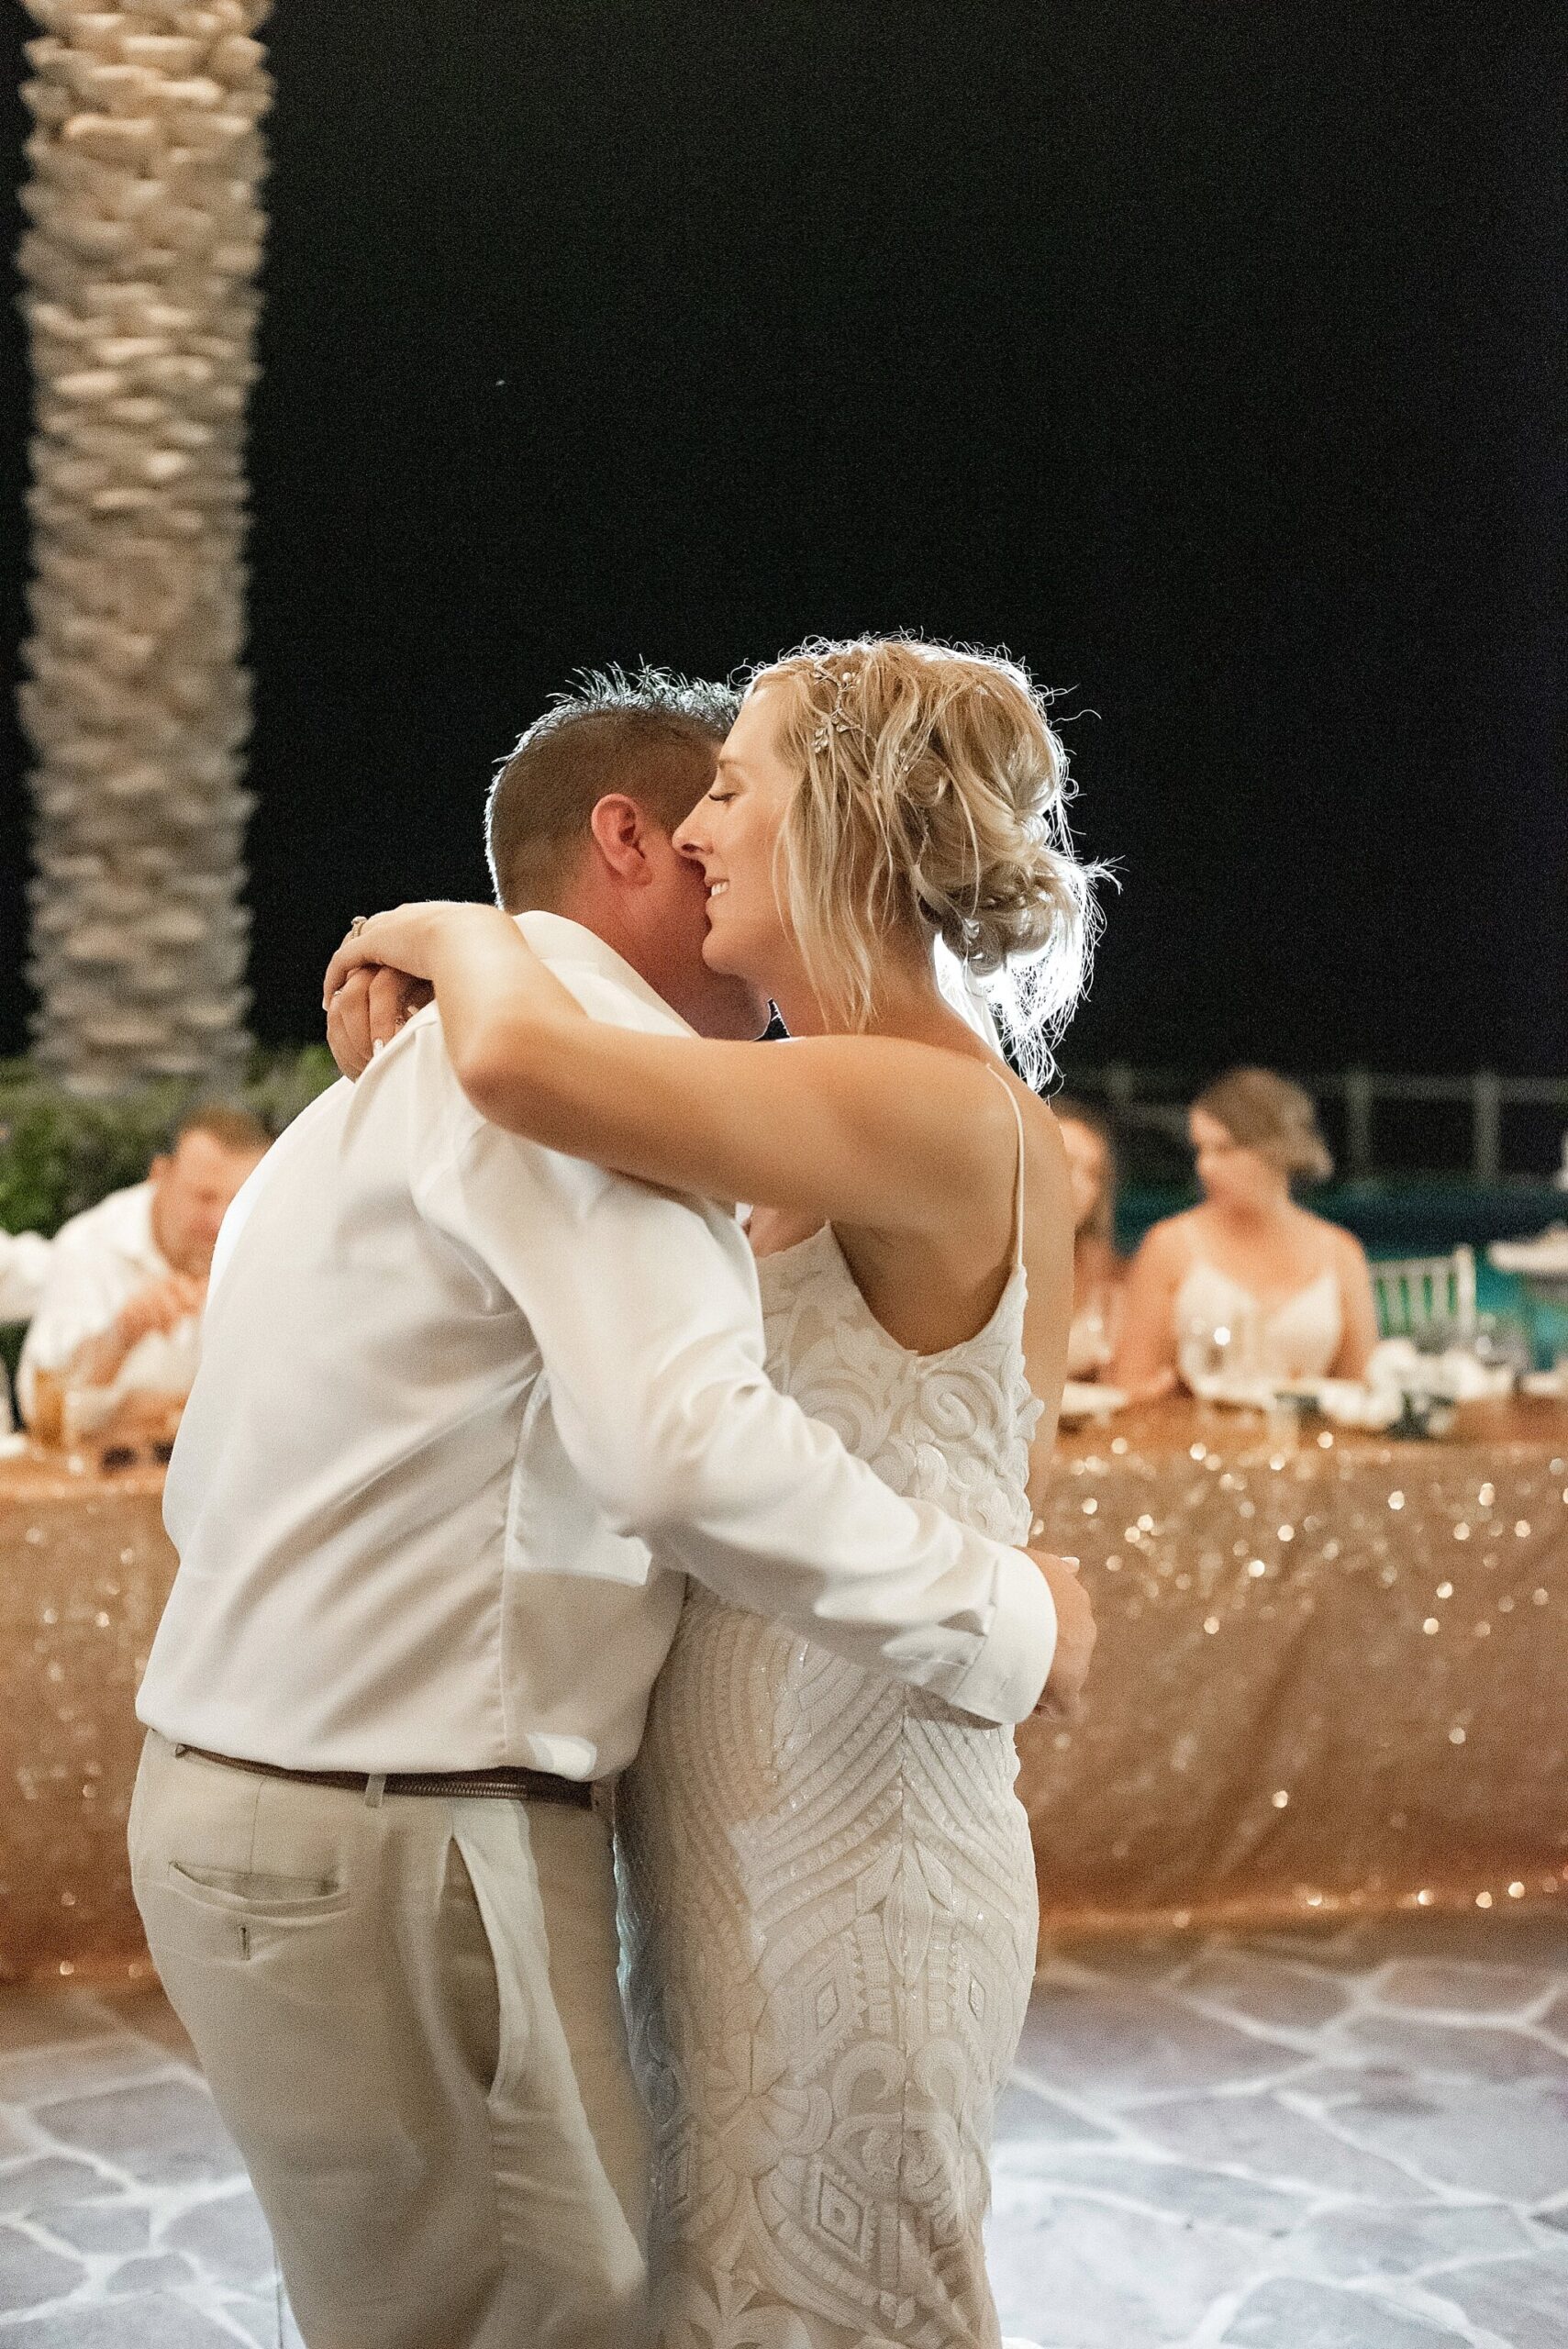 first dance at rooftop poolside wedding reception destination pueblo bonito sunset beach mexico